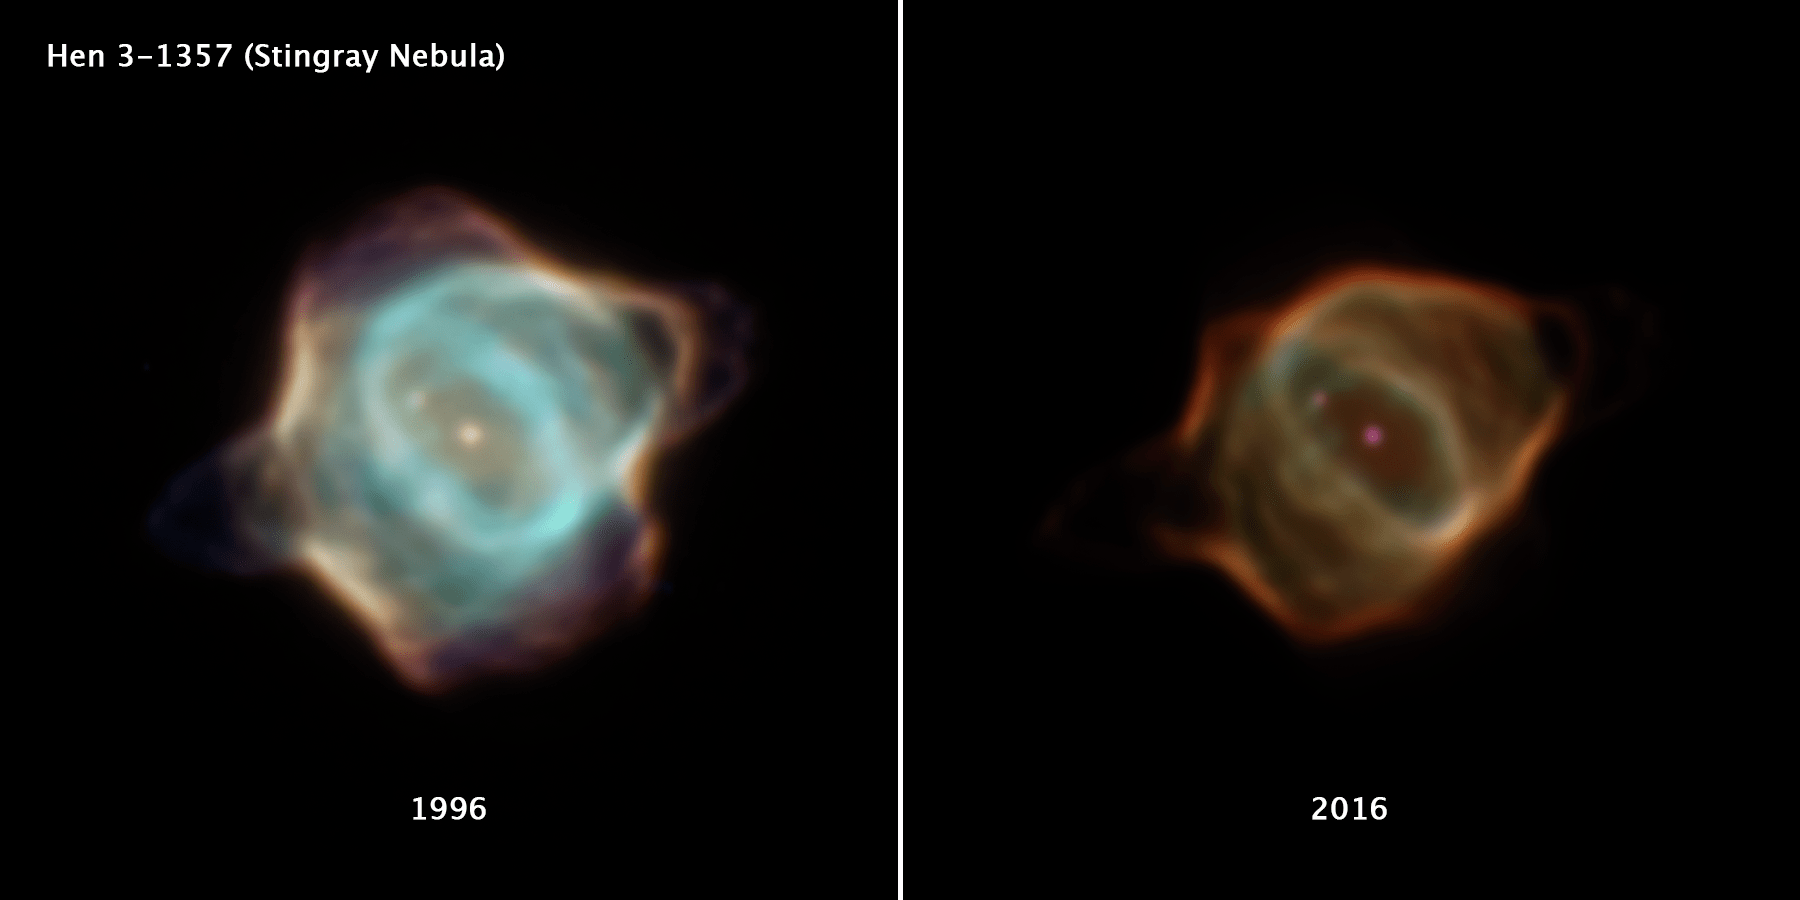 This image compares two drastically different portraits of the Stingray nebula captured by NASA’s Hubble 20 years apart.